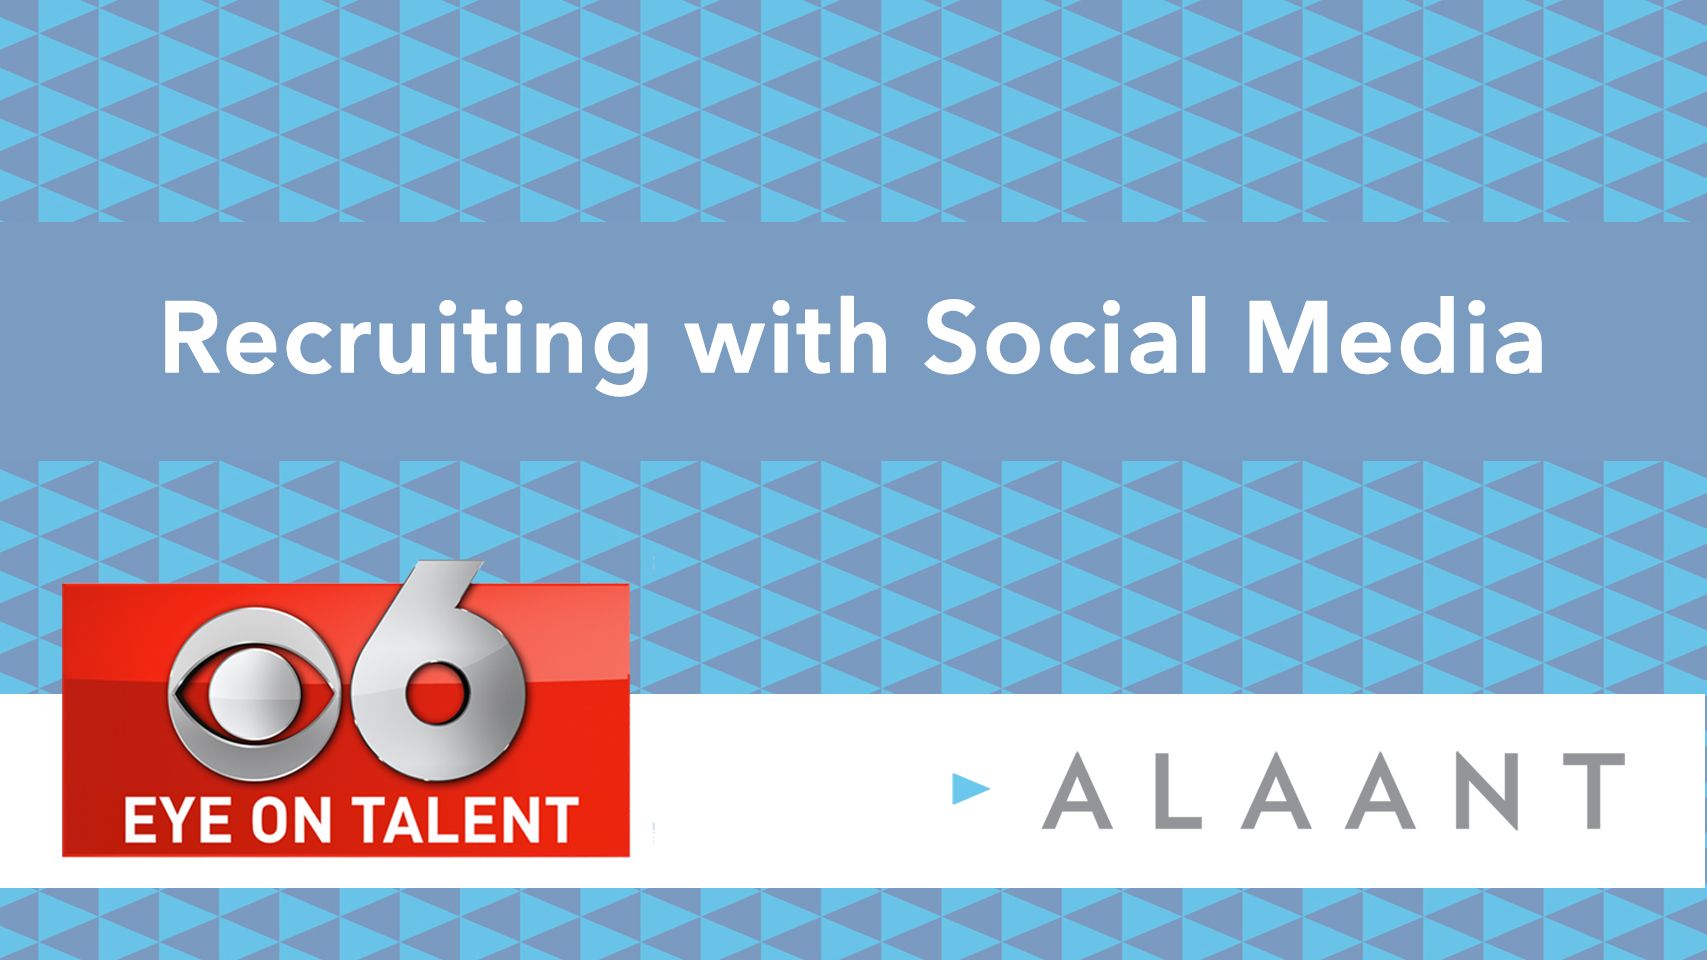 Alaant Eye on Talent: Recruiting with Social Media